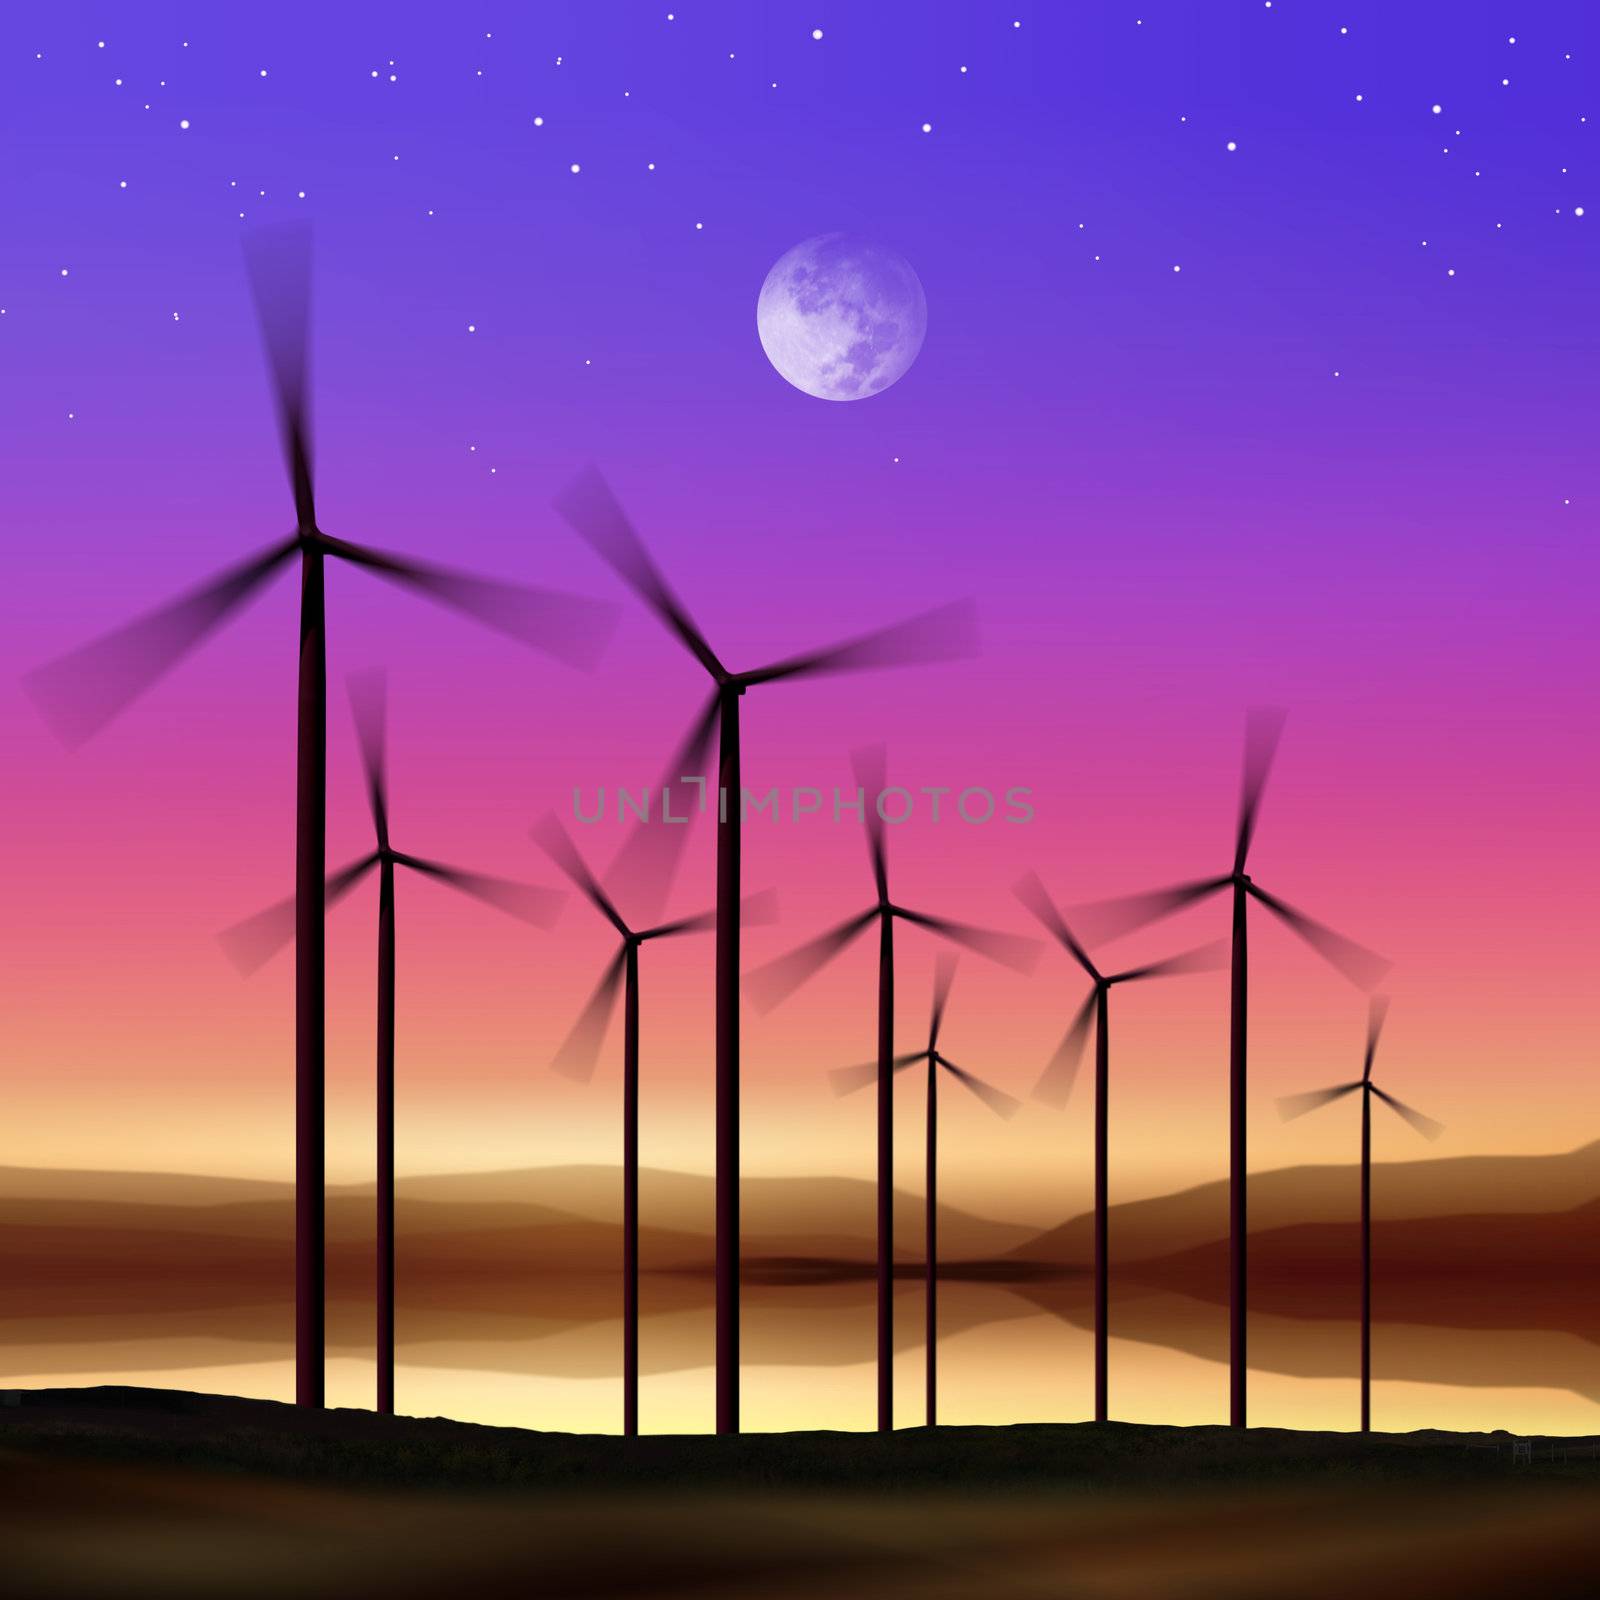 silhouette of wind turbines generating electricity on night sky